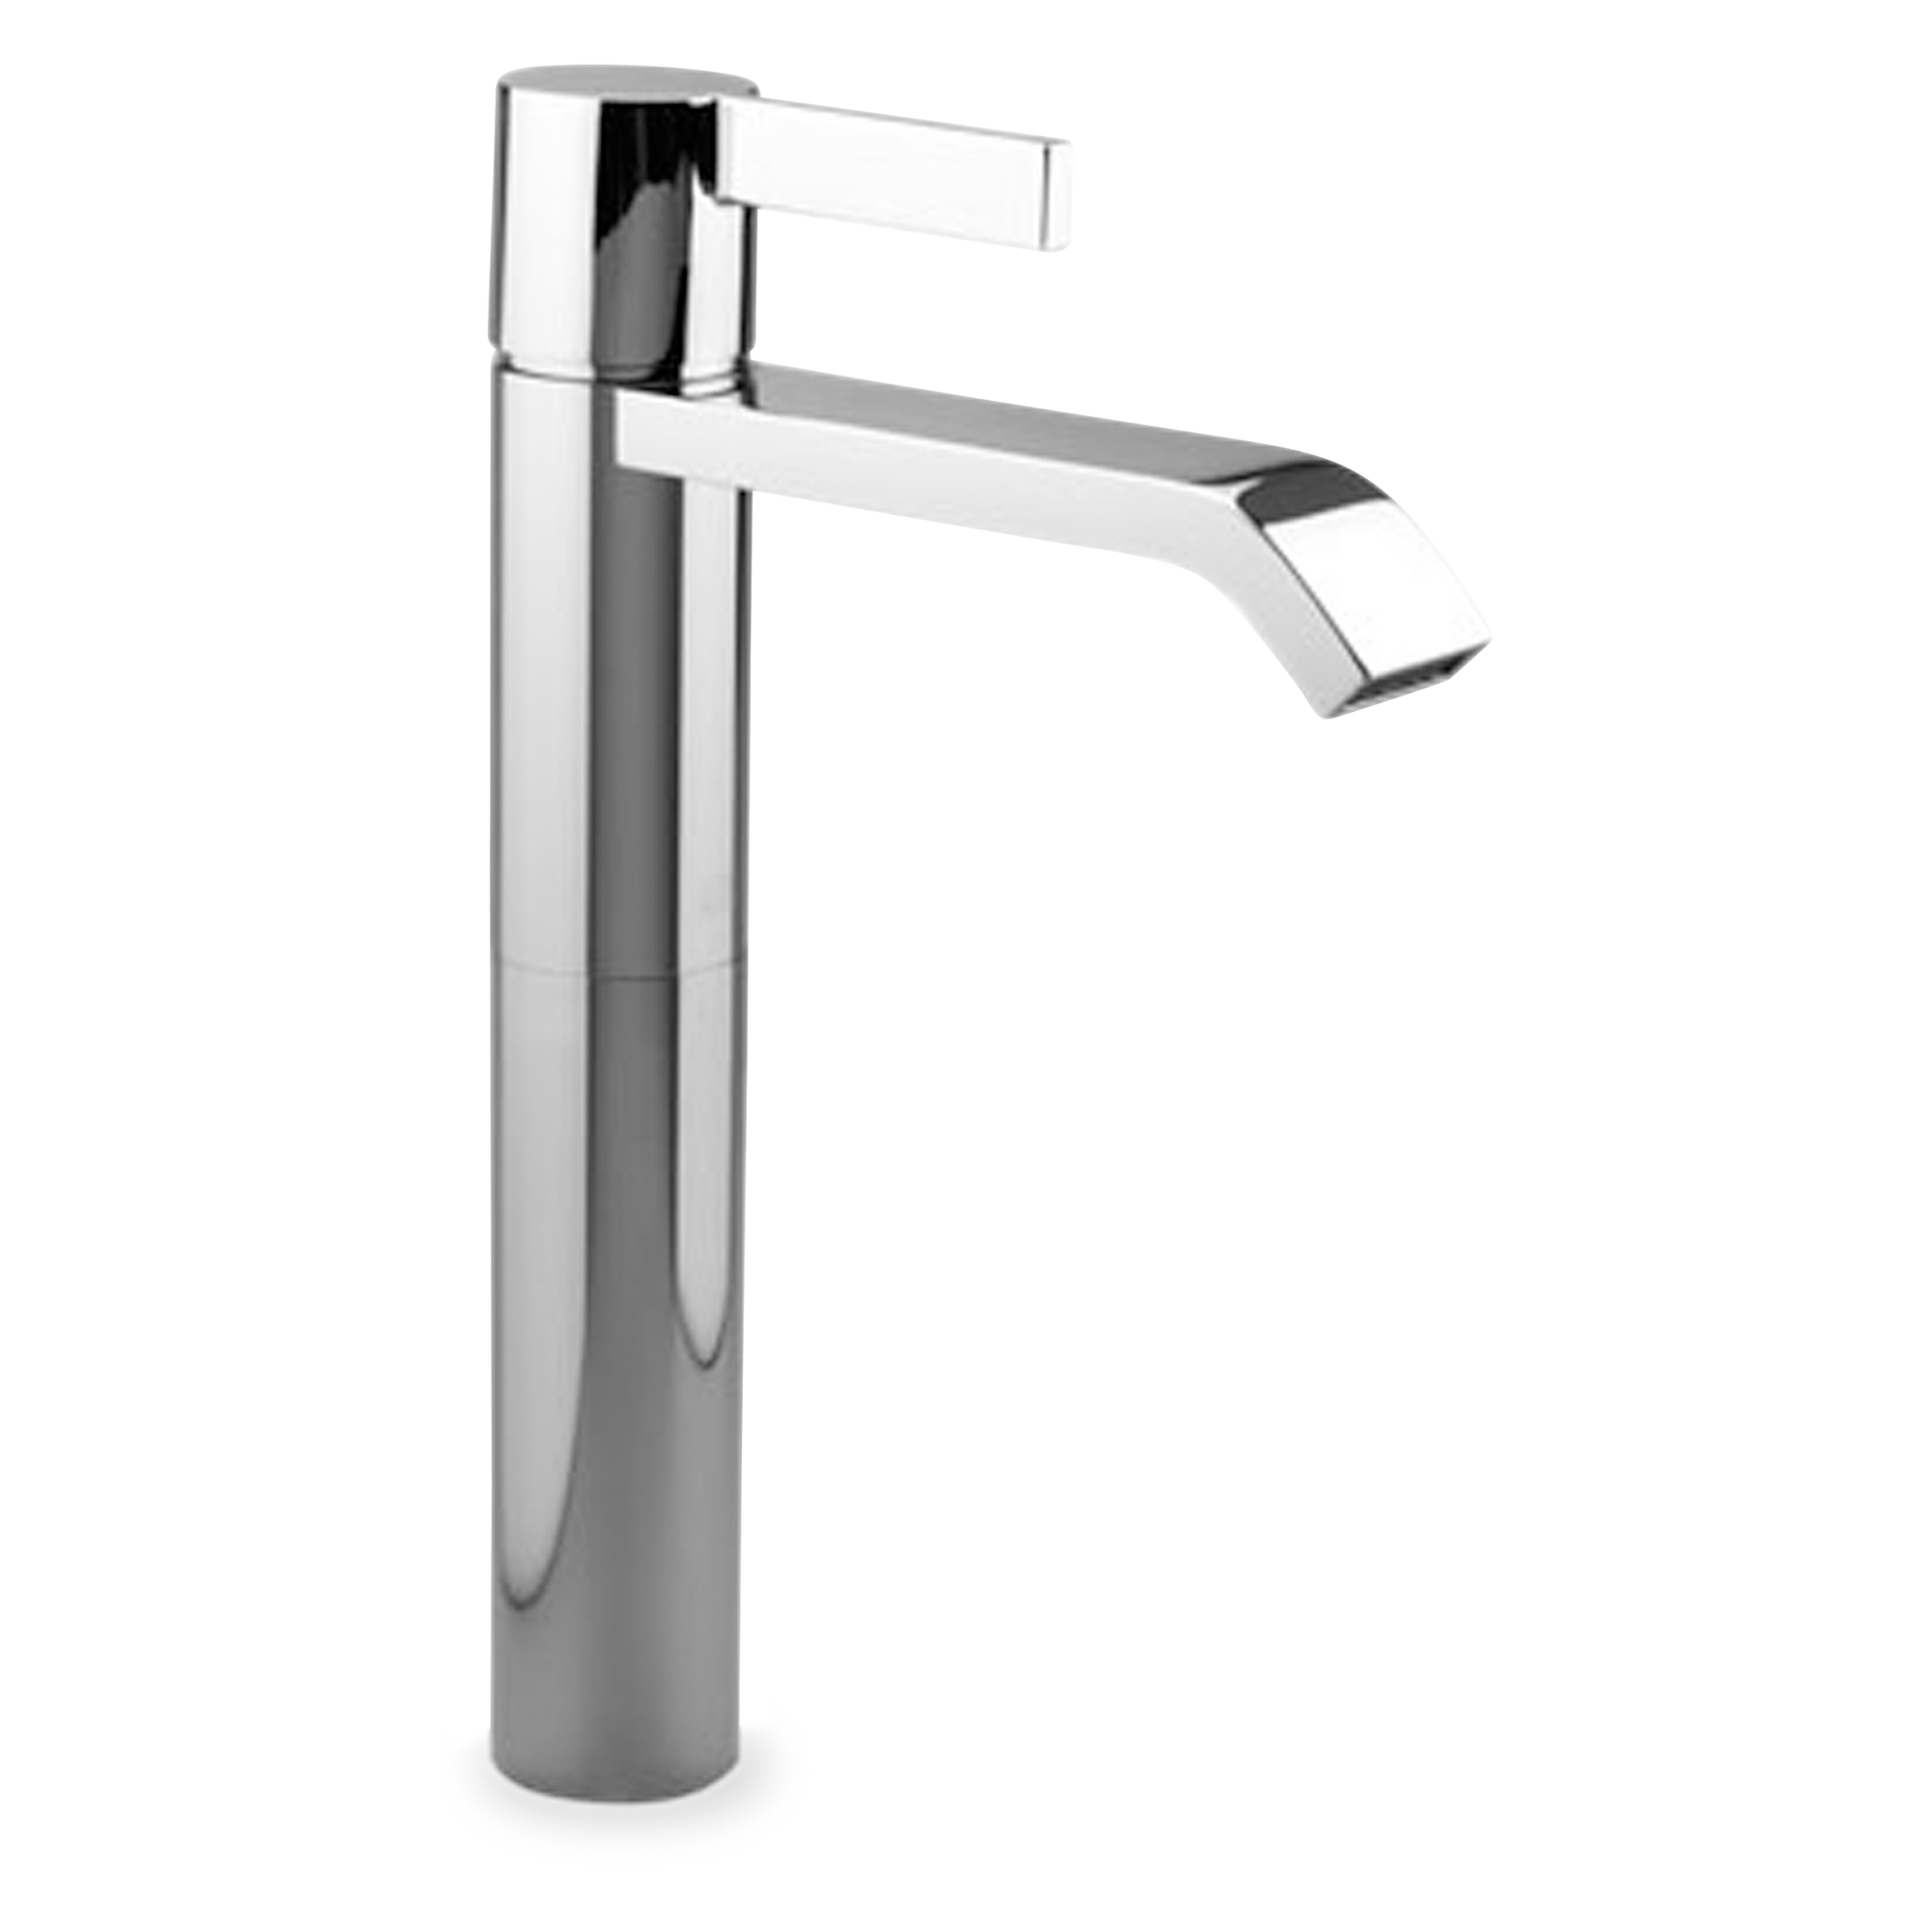 Single-lever lavatory mixer with extended shank, for use with vessel sinks.